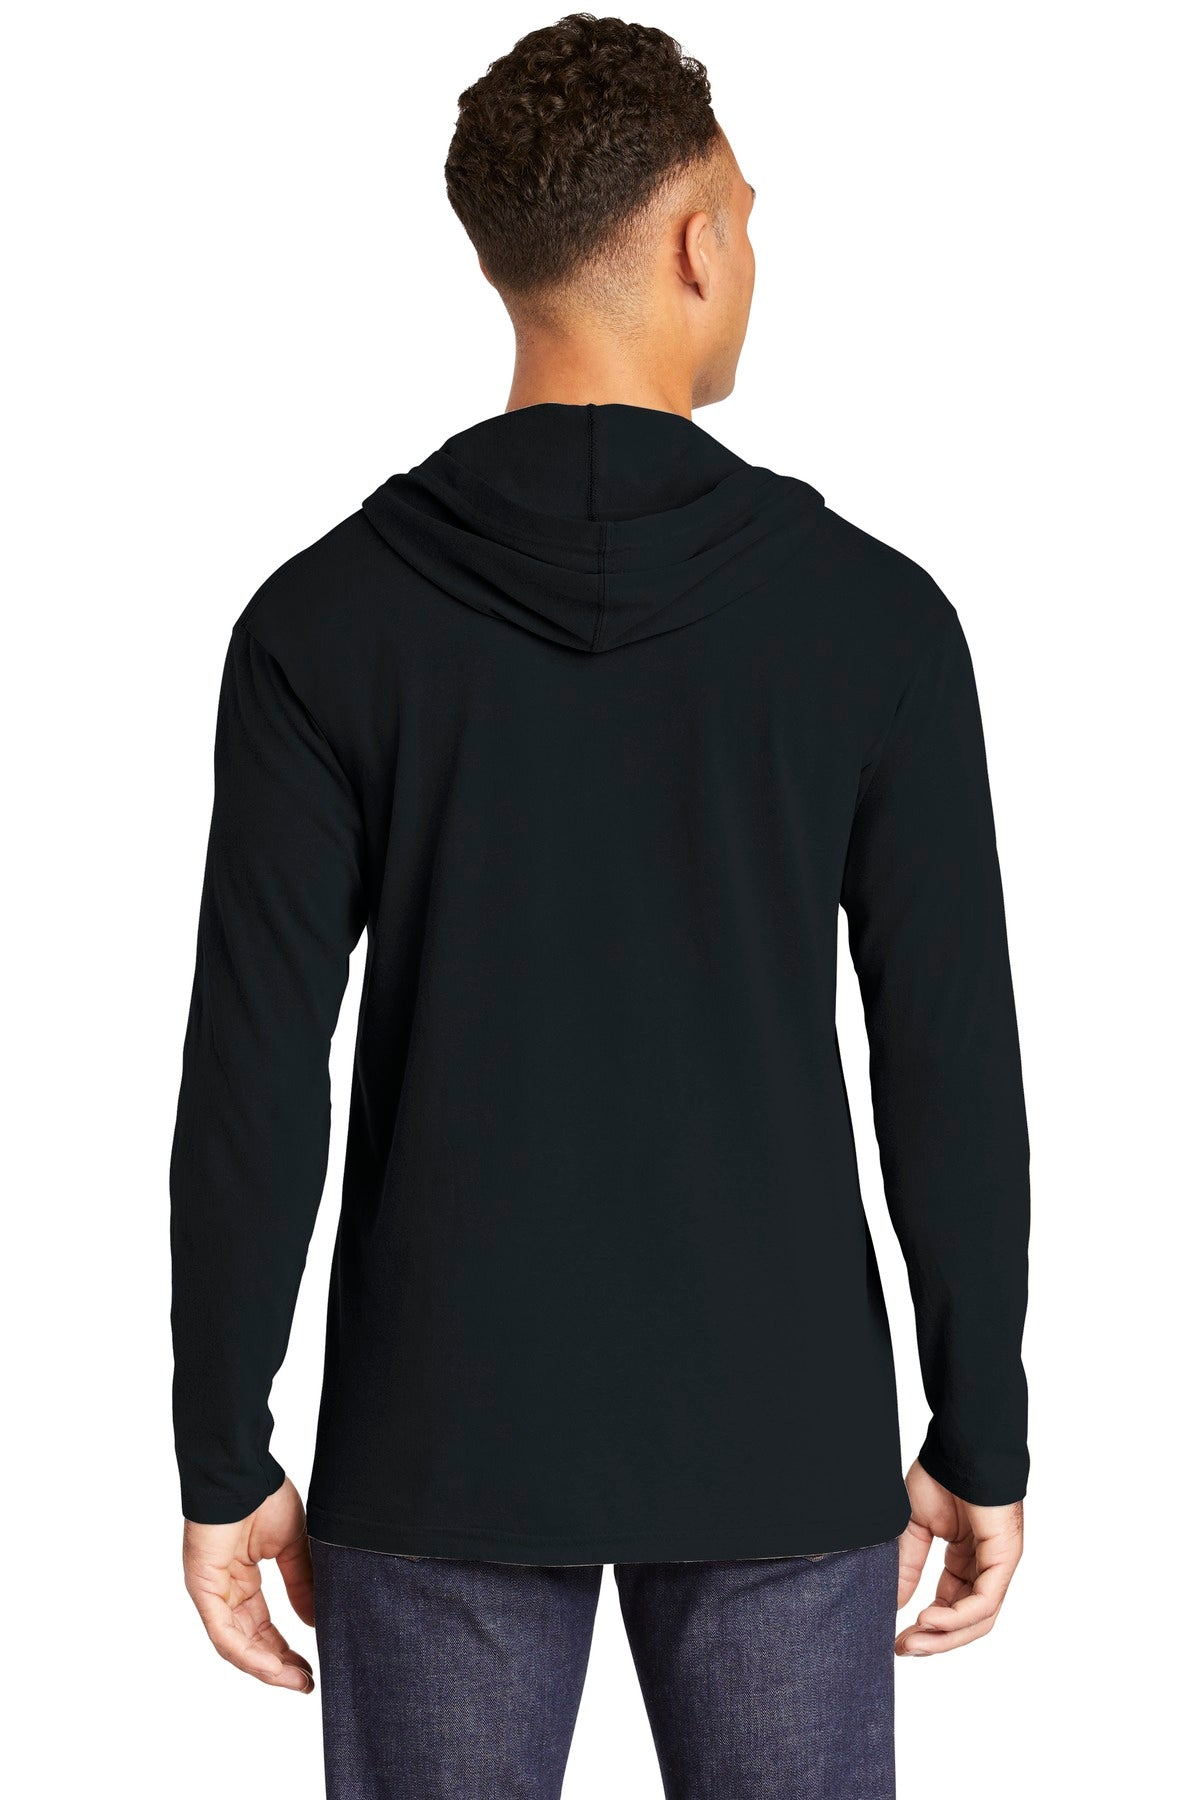 COMFORT COLORS ® Heavyweight Ring Spun Long Sleeve Hooded Tee. 4900 - DFW Impression